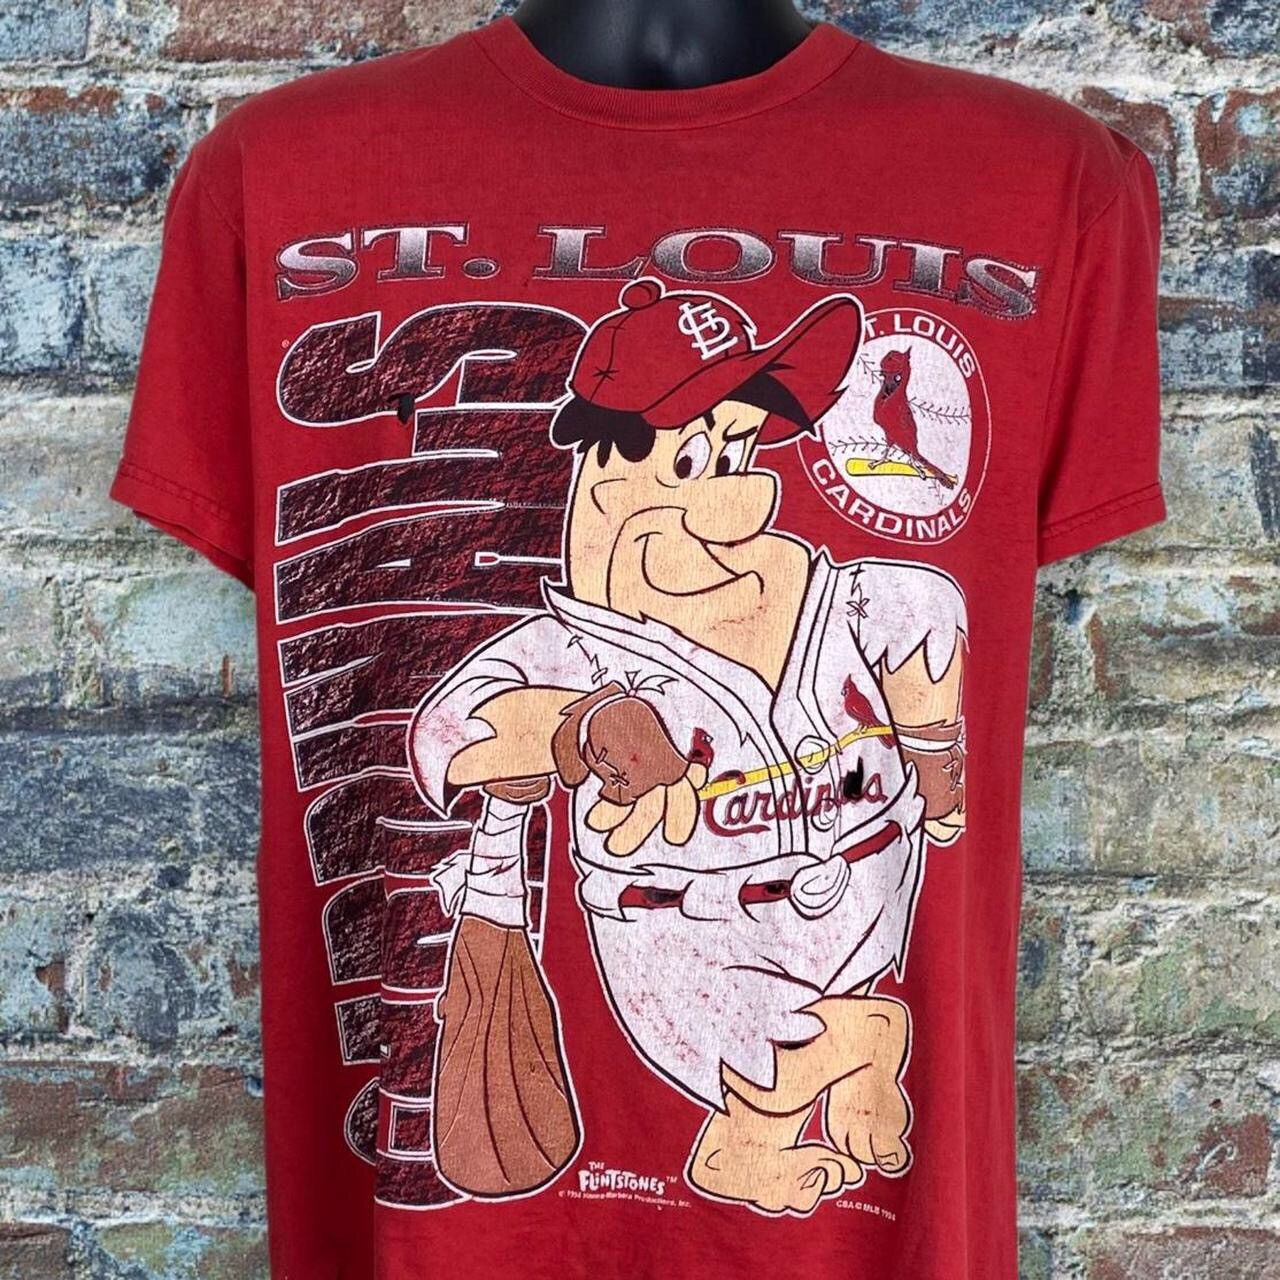 Vintage 1990 Stan Musial Caricature St. Louis Cardinals T-Shirt in